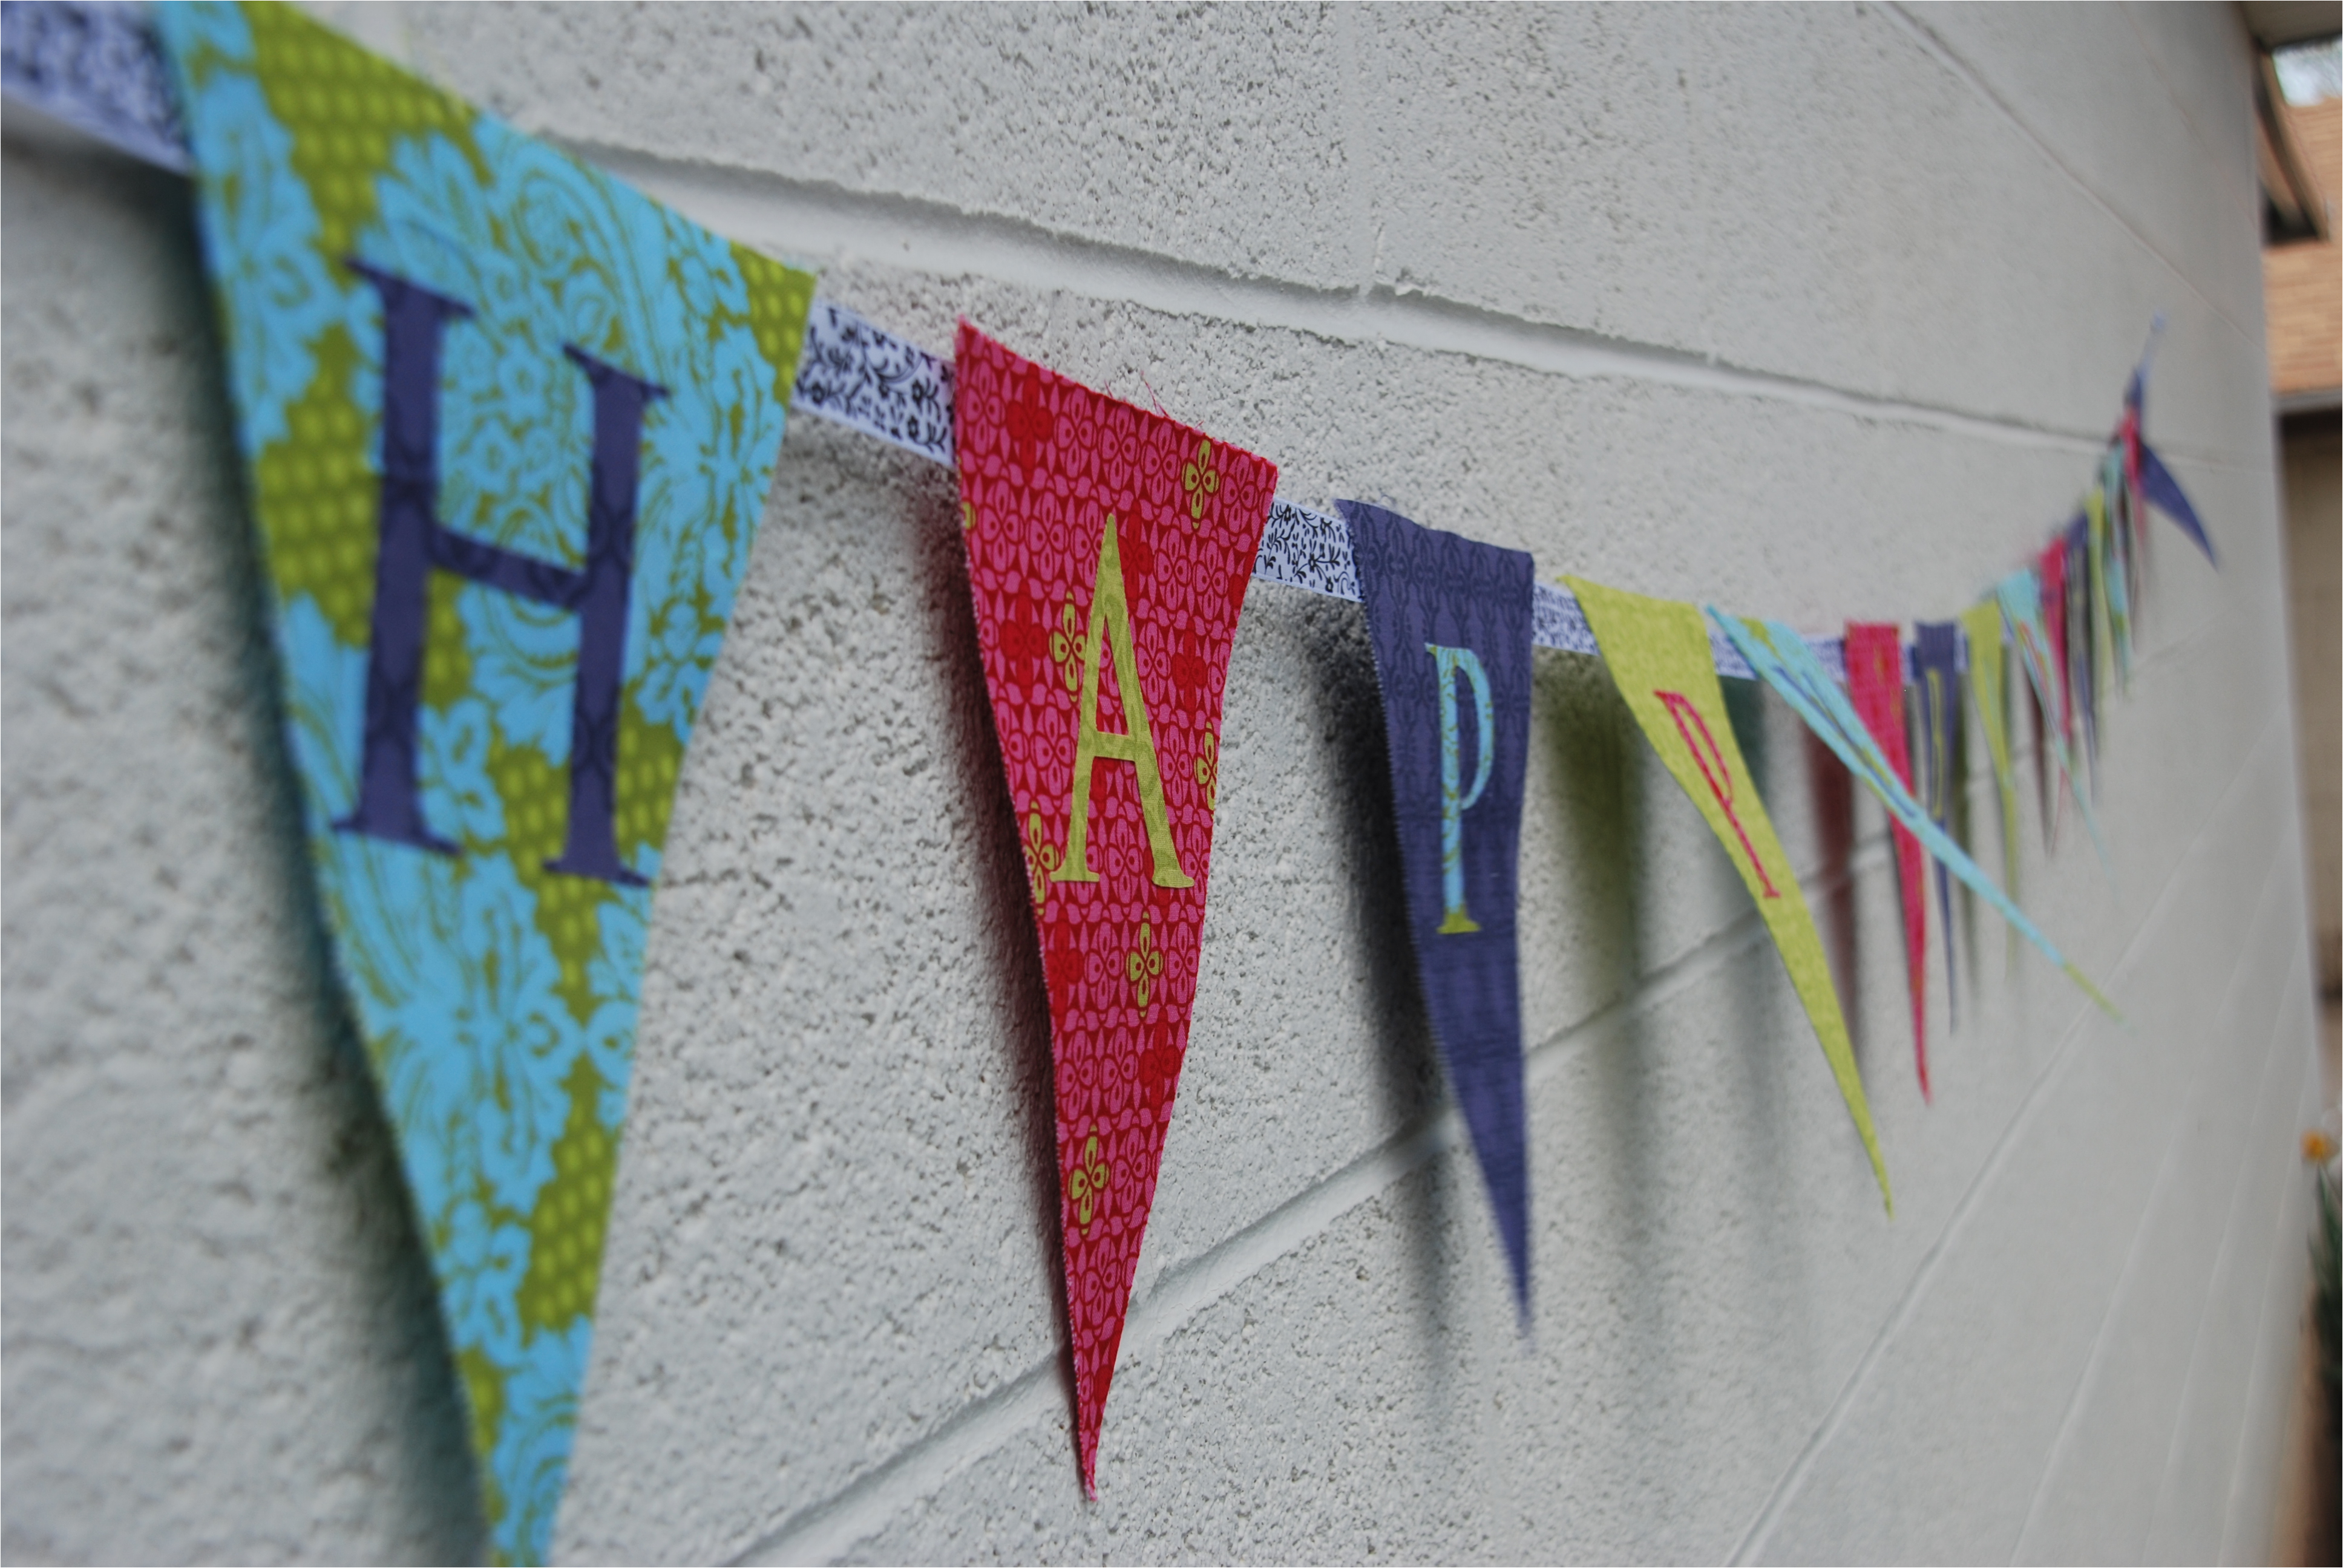 How to Make A Happy Birthday Banner How to Make A Fabric Happy Birthday Banner Using A Cricut